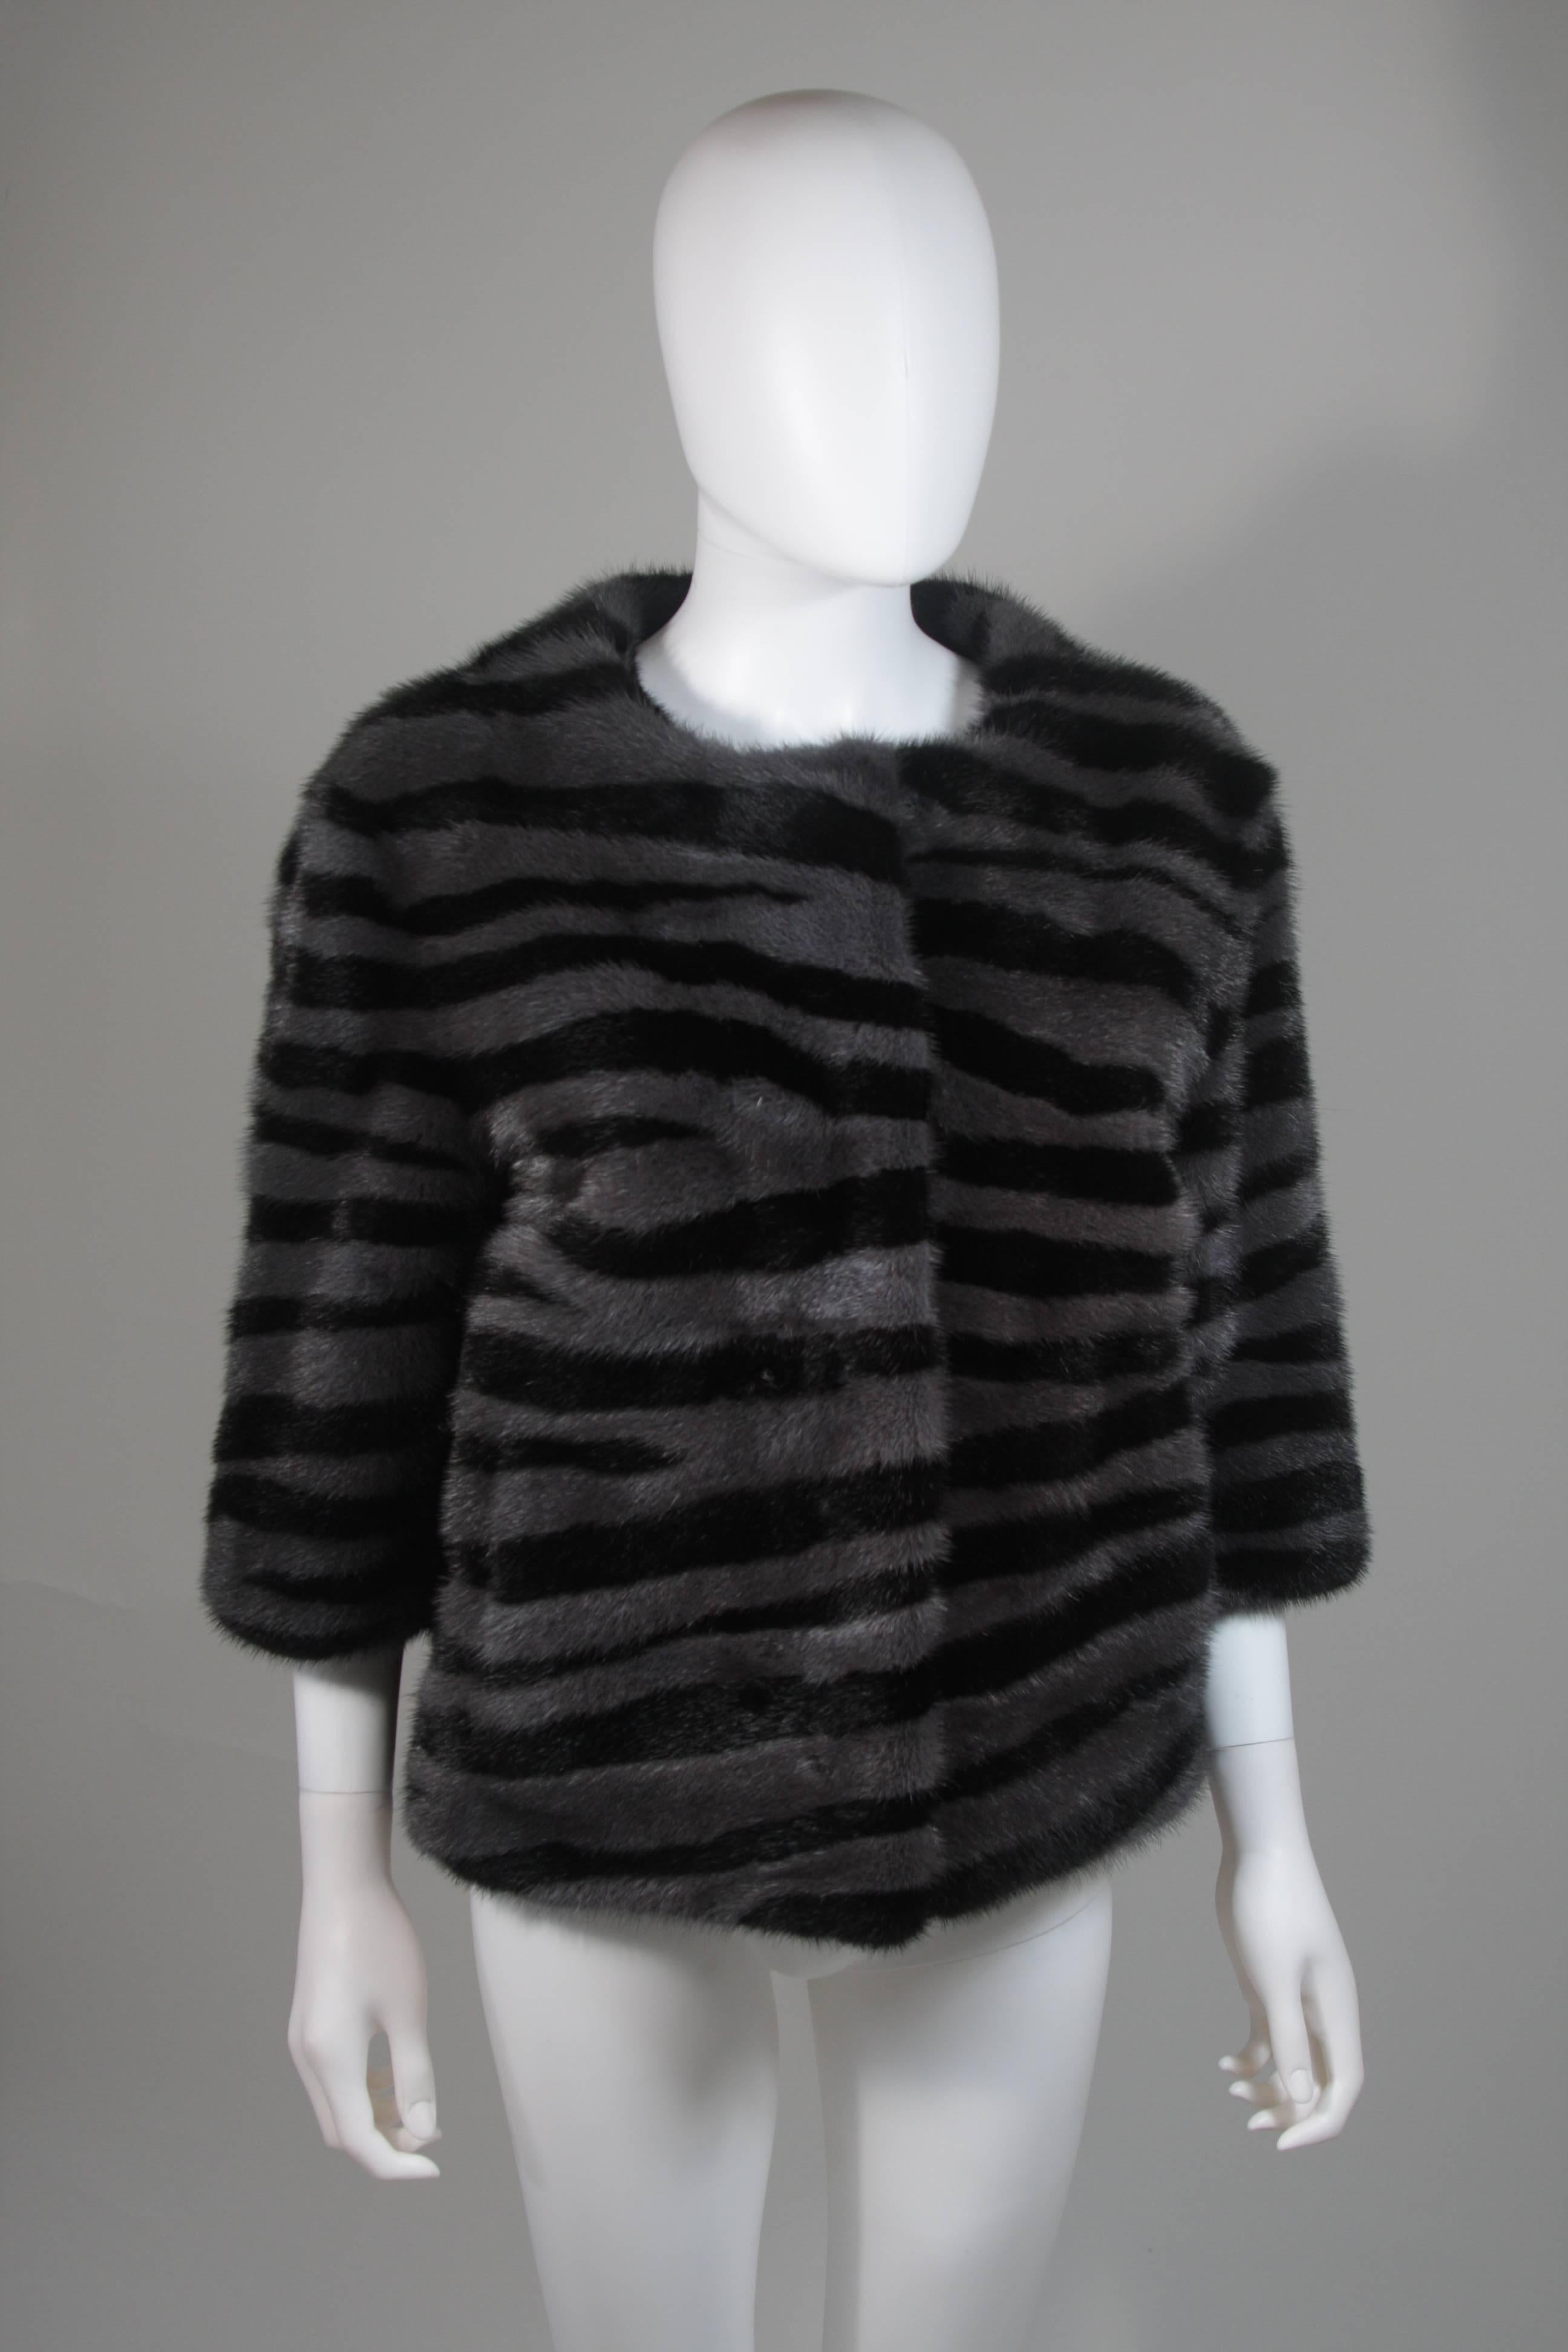 Women's Marc Jacobs Black and Grey Striped Mink Jacket Size 4